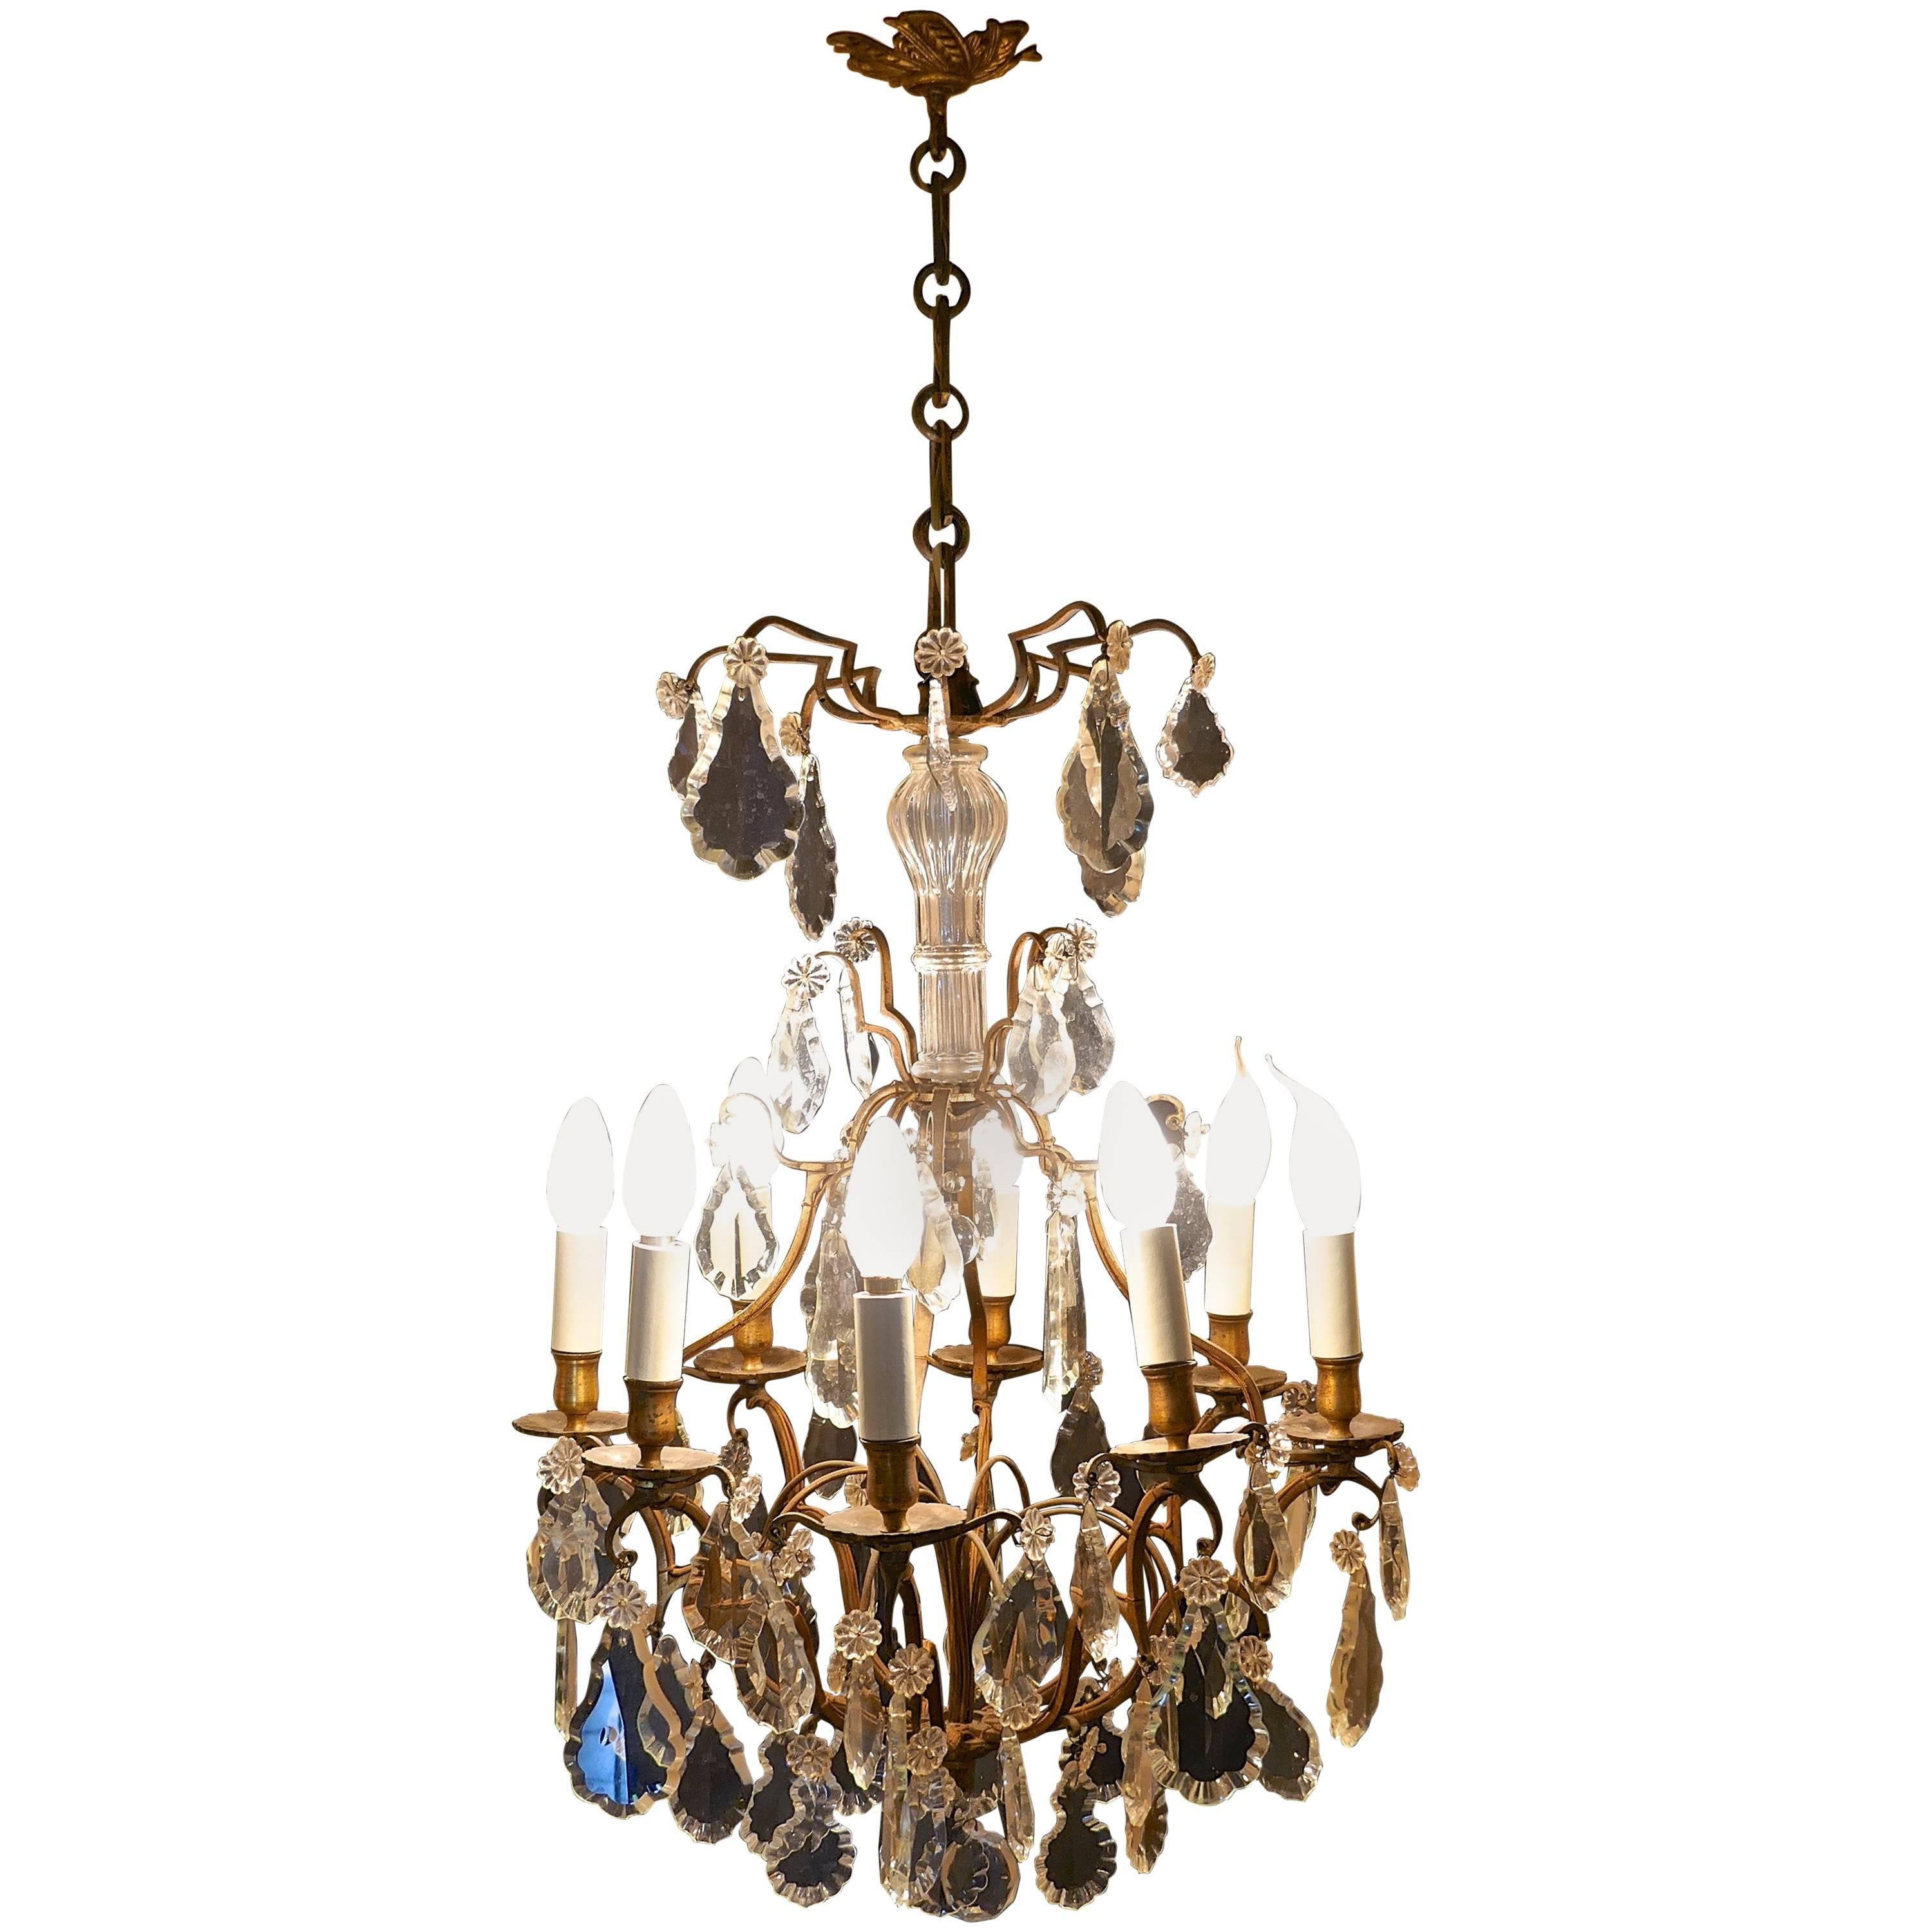 Stunning Large French Eight-Branch Chandelier